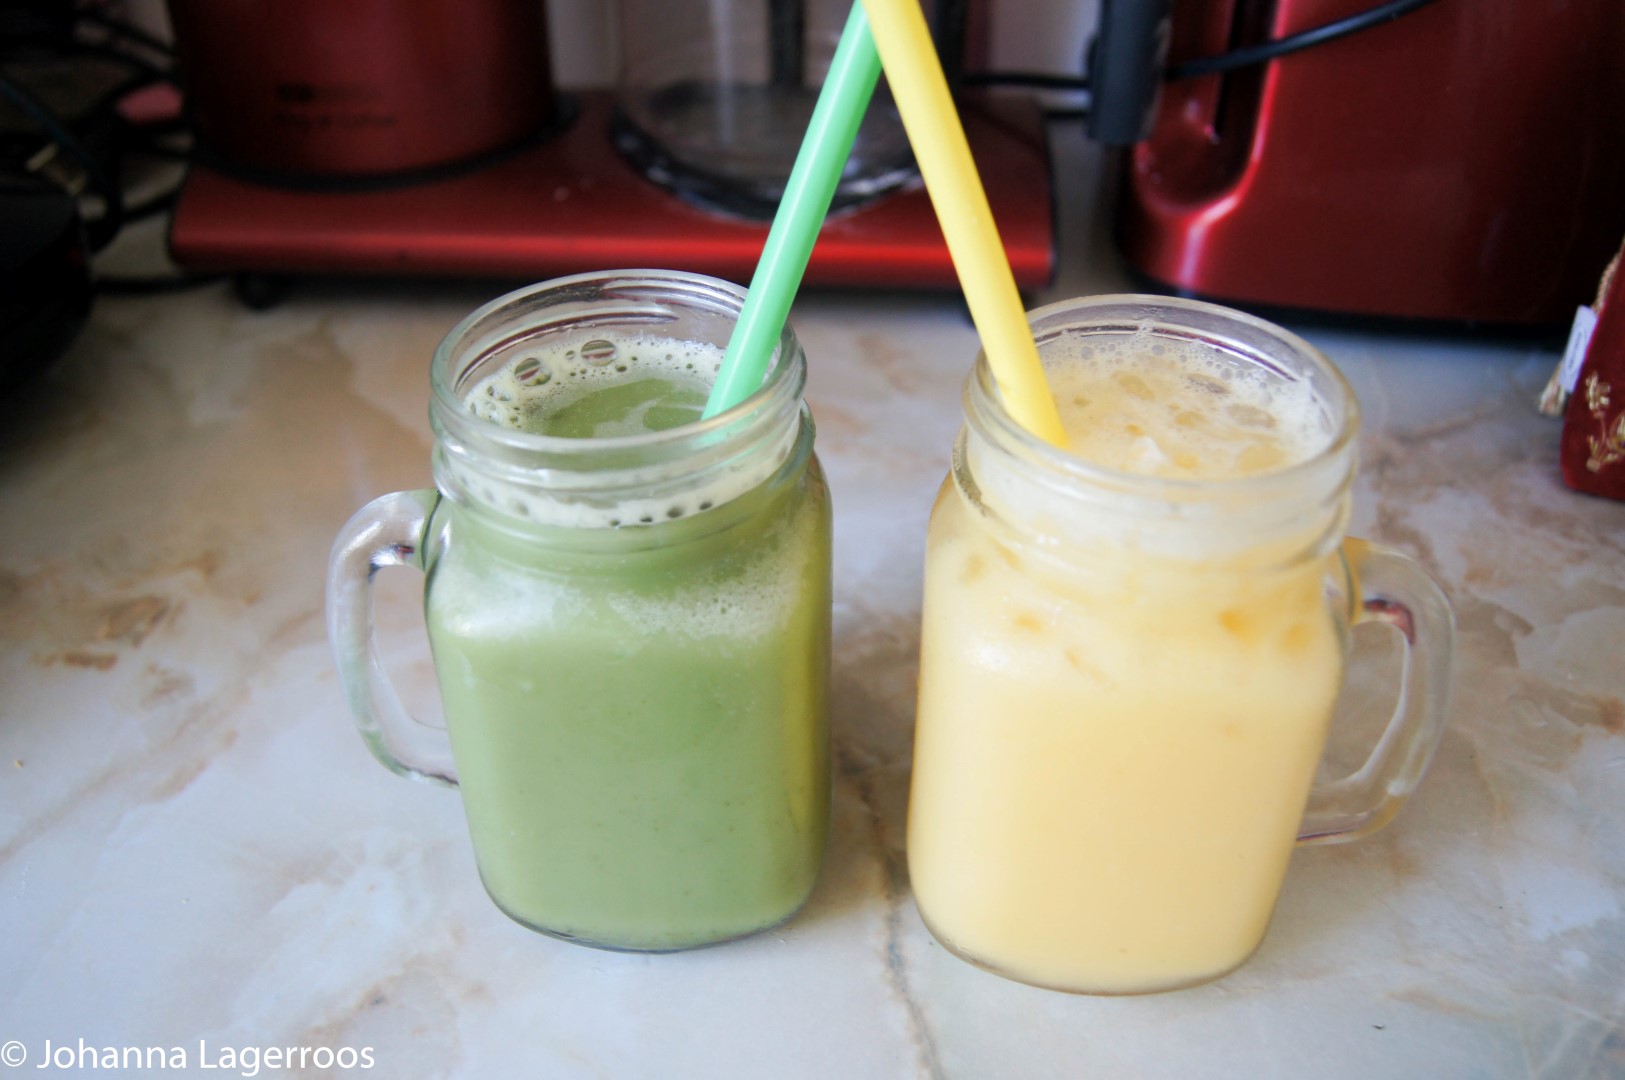 green and yellow drink